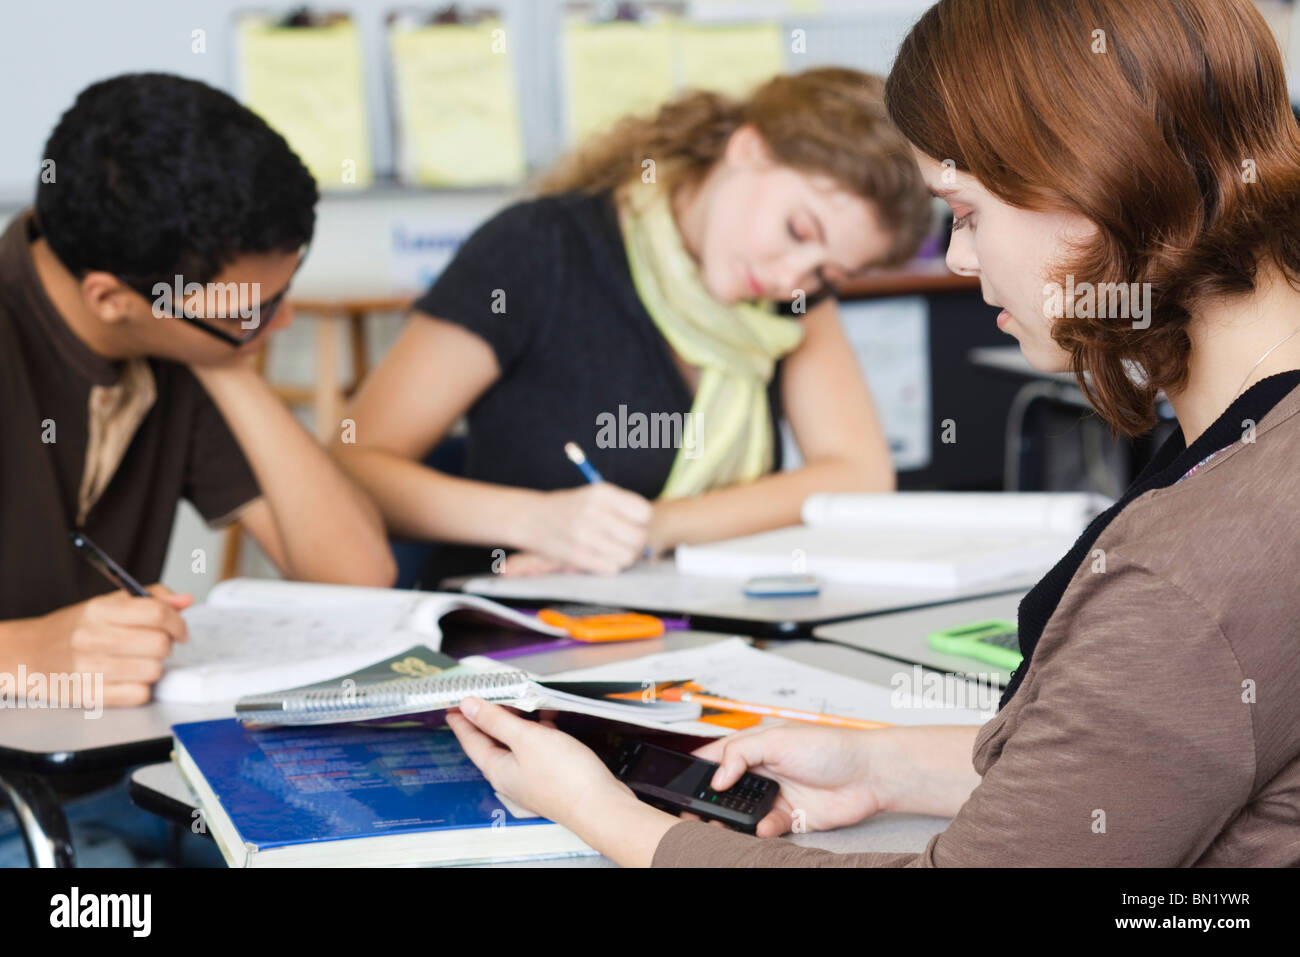 Student looking at cell phone during class Stock Photo